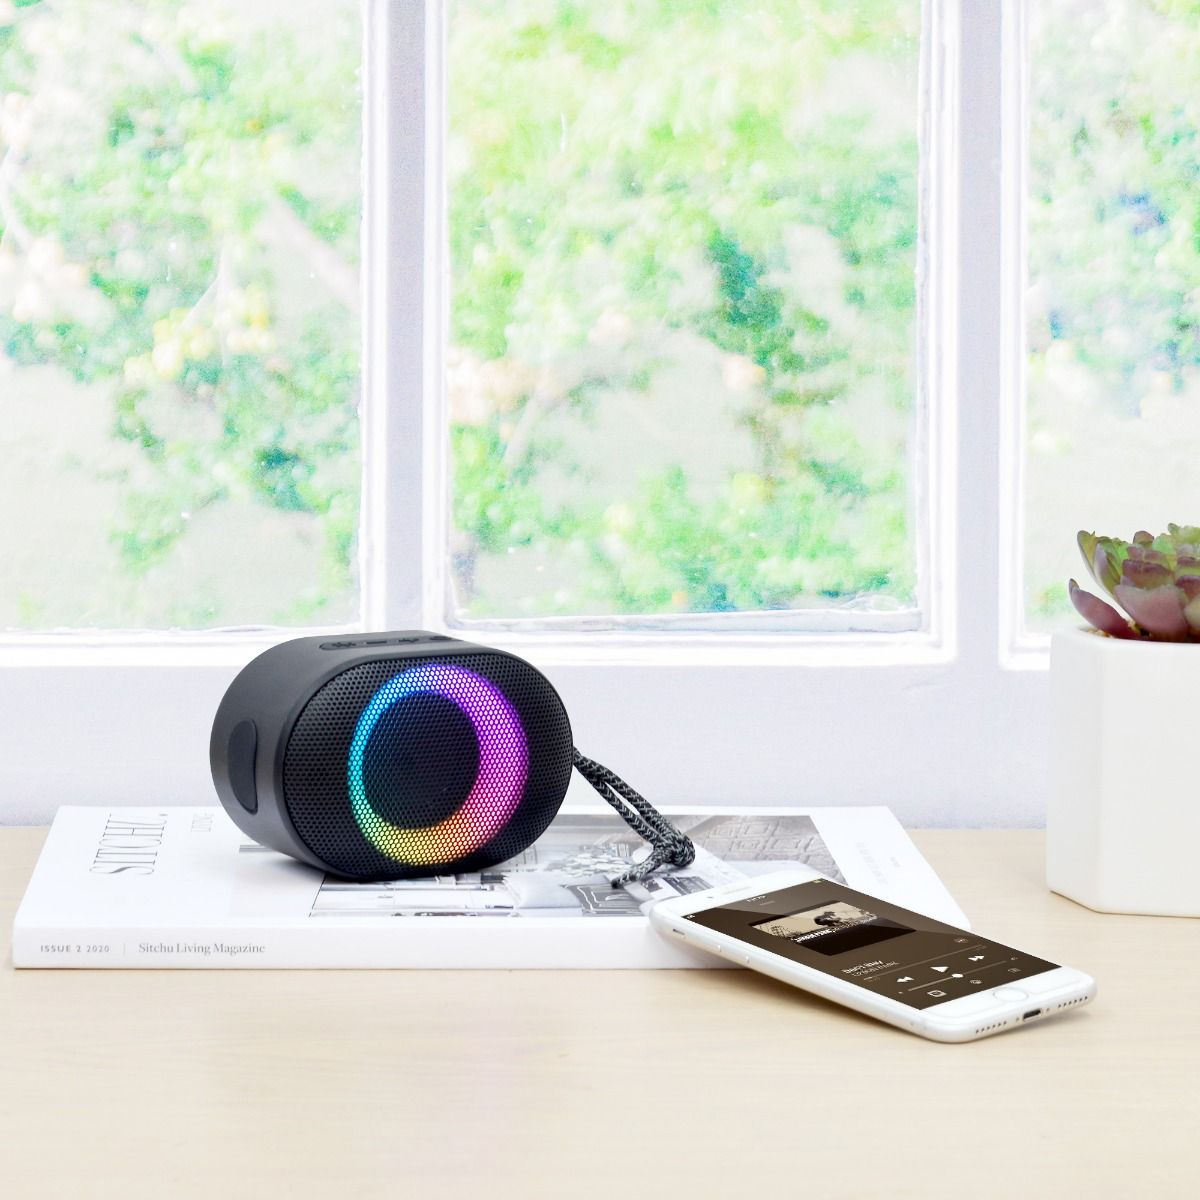 A large marketing image providing additional information about the product mbeat BUMP B1 IPX6 Bluetooth Speaker with Pulsing RGB Lights - Additional alt info not provided